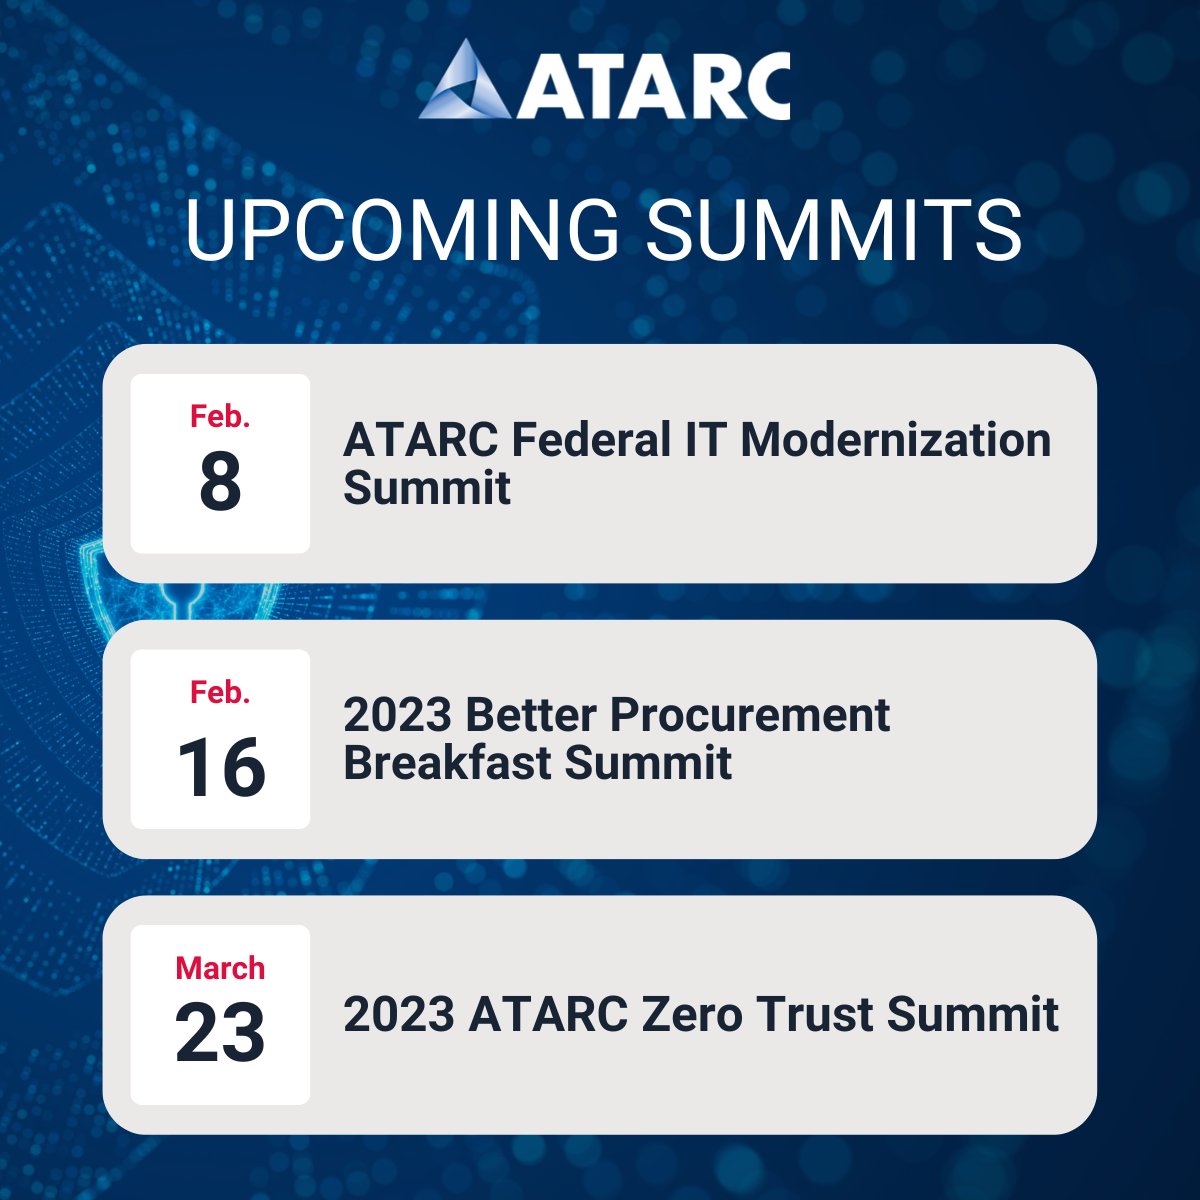 Don't miss out on ATARC's upcoming events! Visit our website to register and learn more - atarc.org

#ATARC #FederalIT #DigitalTransformation #ZeroTrust